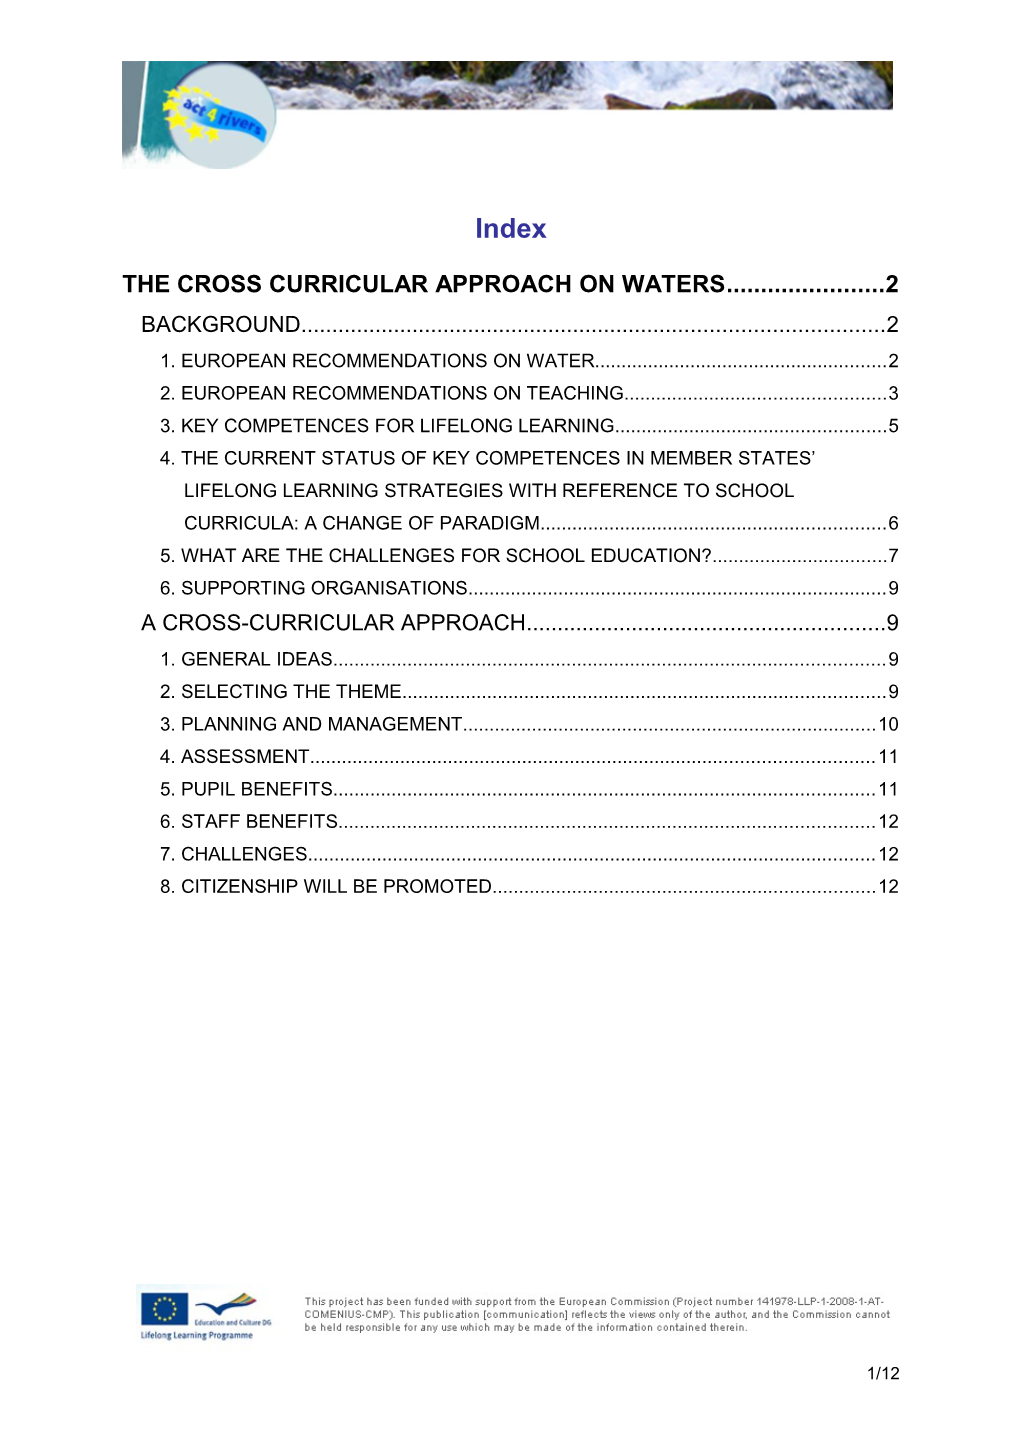 The Cross Curricular Approach on Waters 2